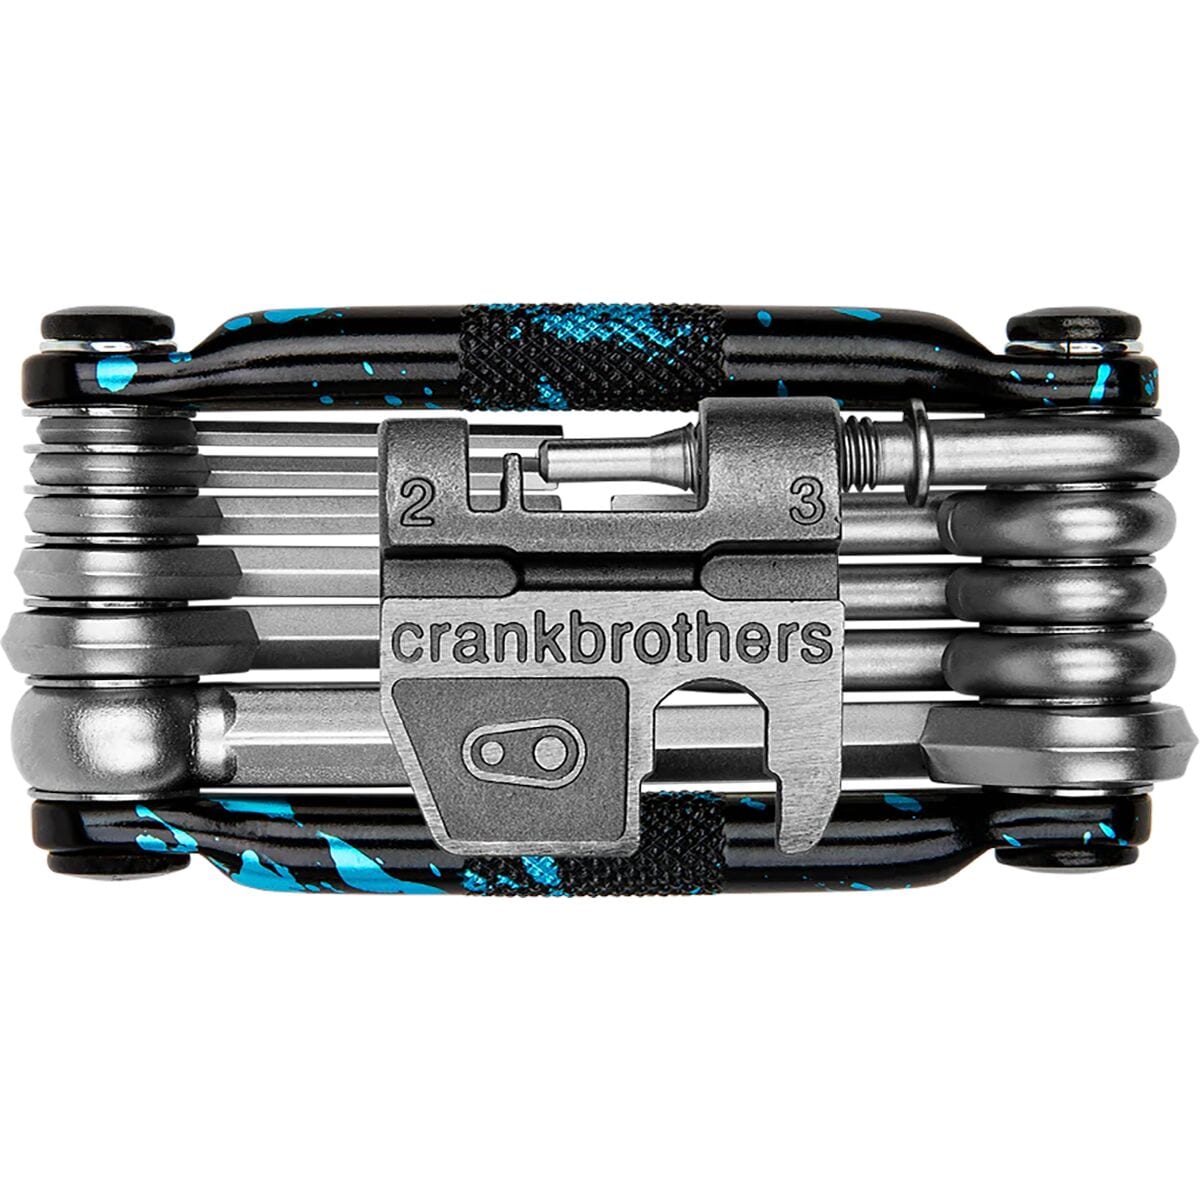 Crank Brothers M17 Splatter Collection Multi-Tool